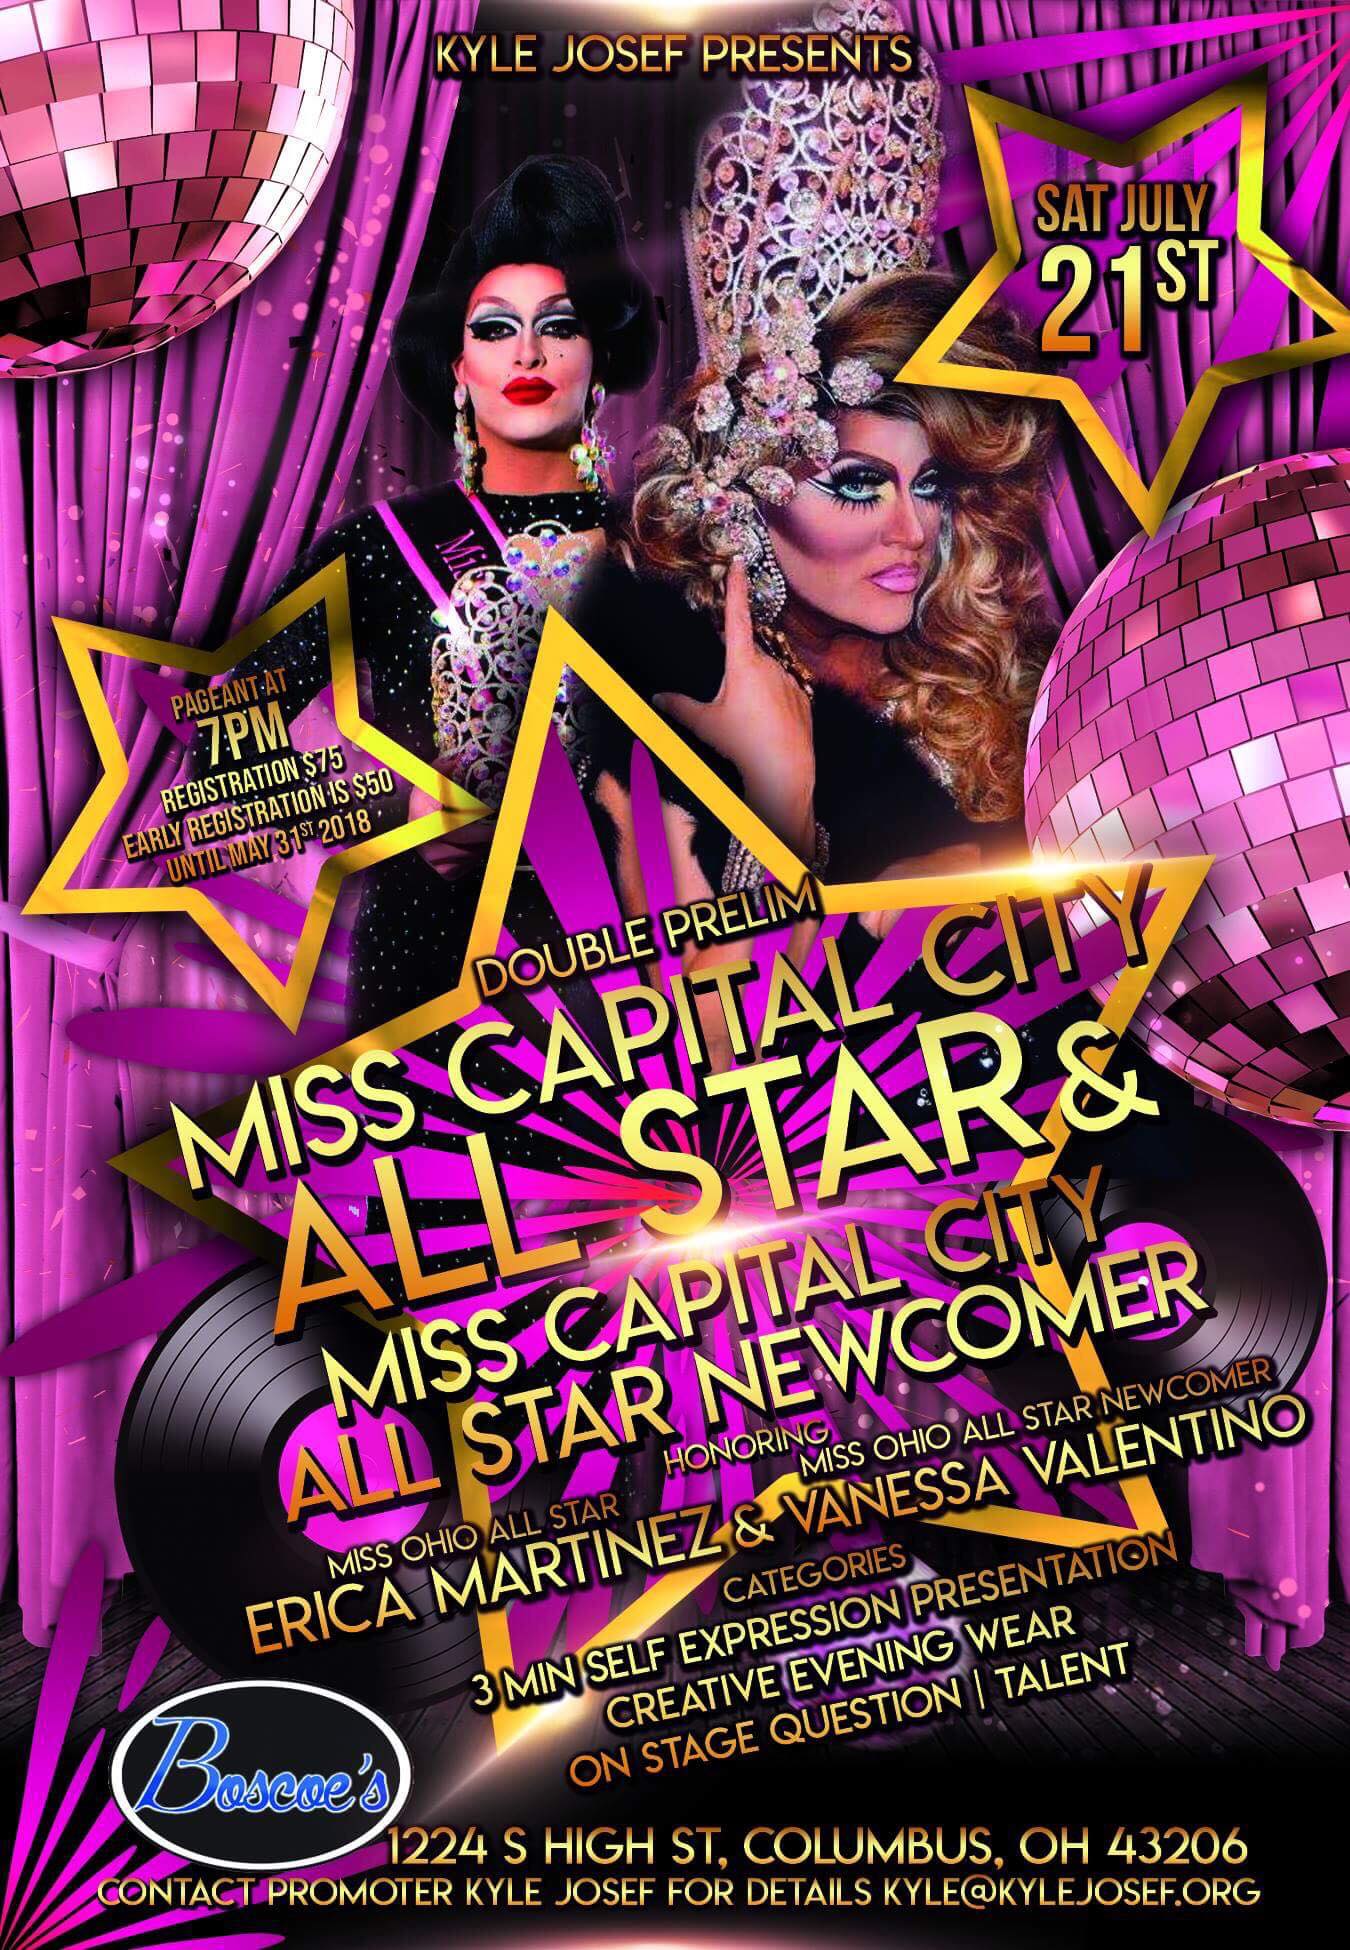 Show Ad | Miss Capital City All-Star and Miss Capital City All-Star Newcomer | Boscoe's (Columbus, Ohio) | 7/21/2018